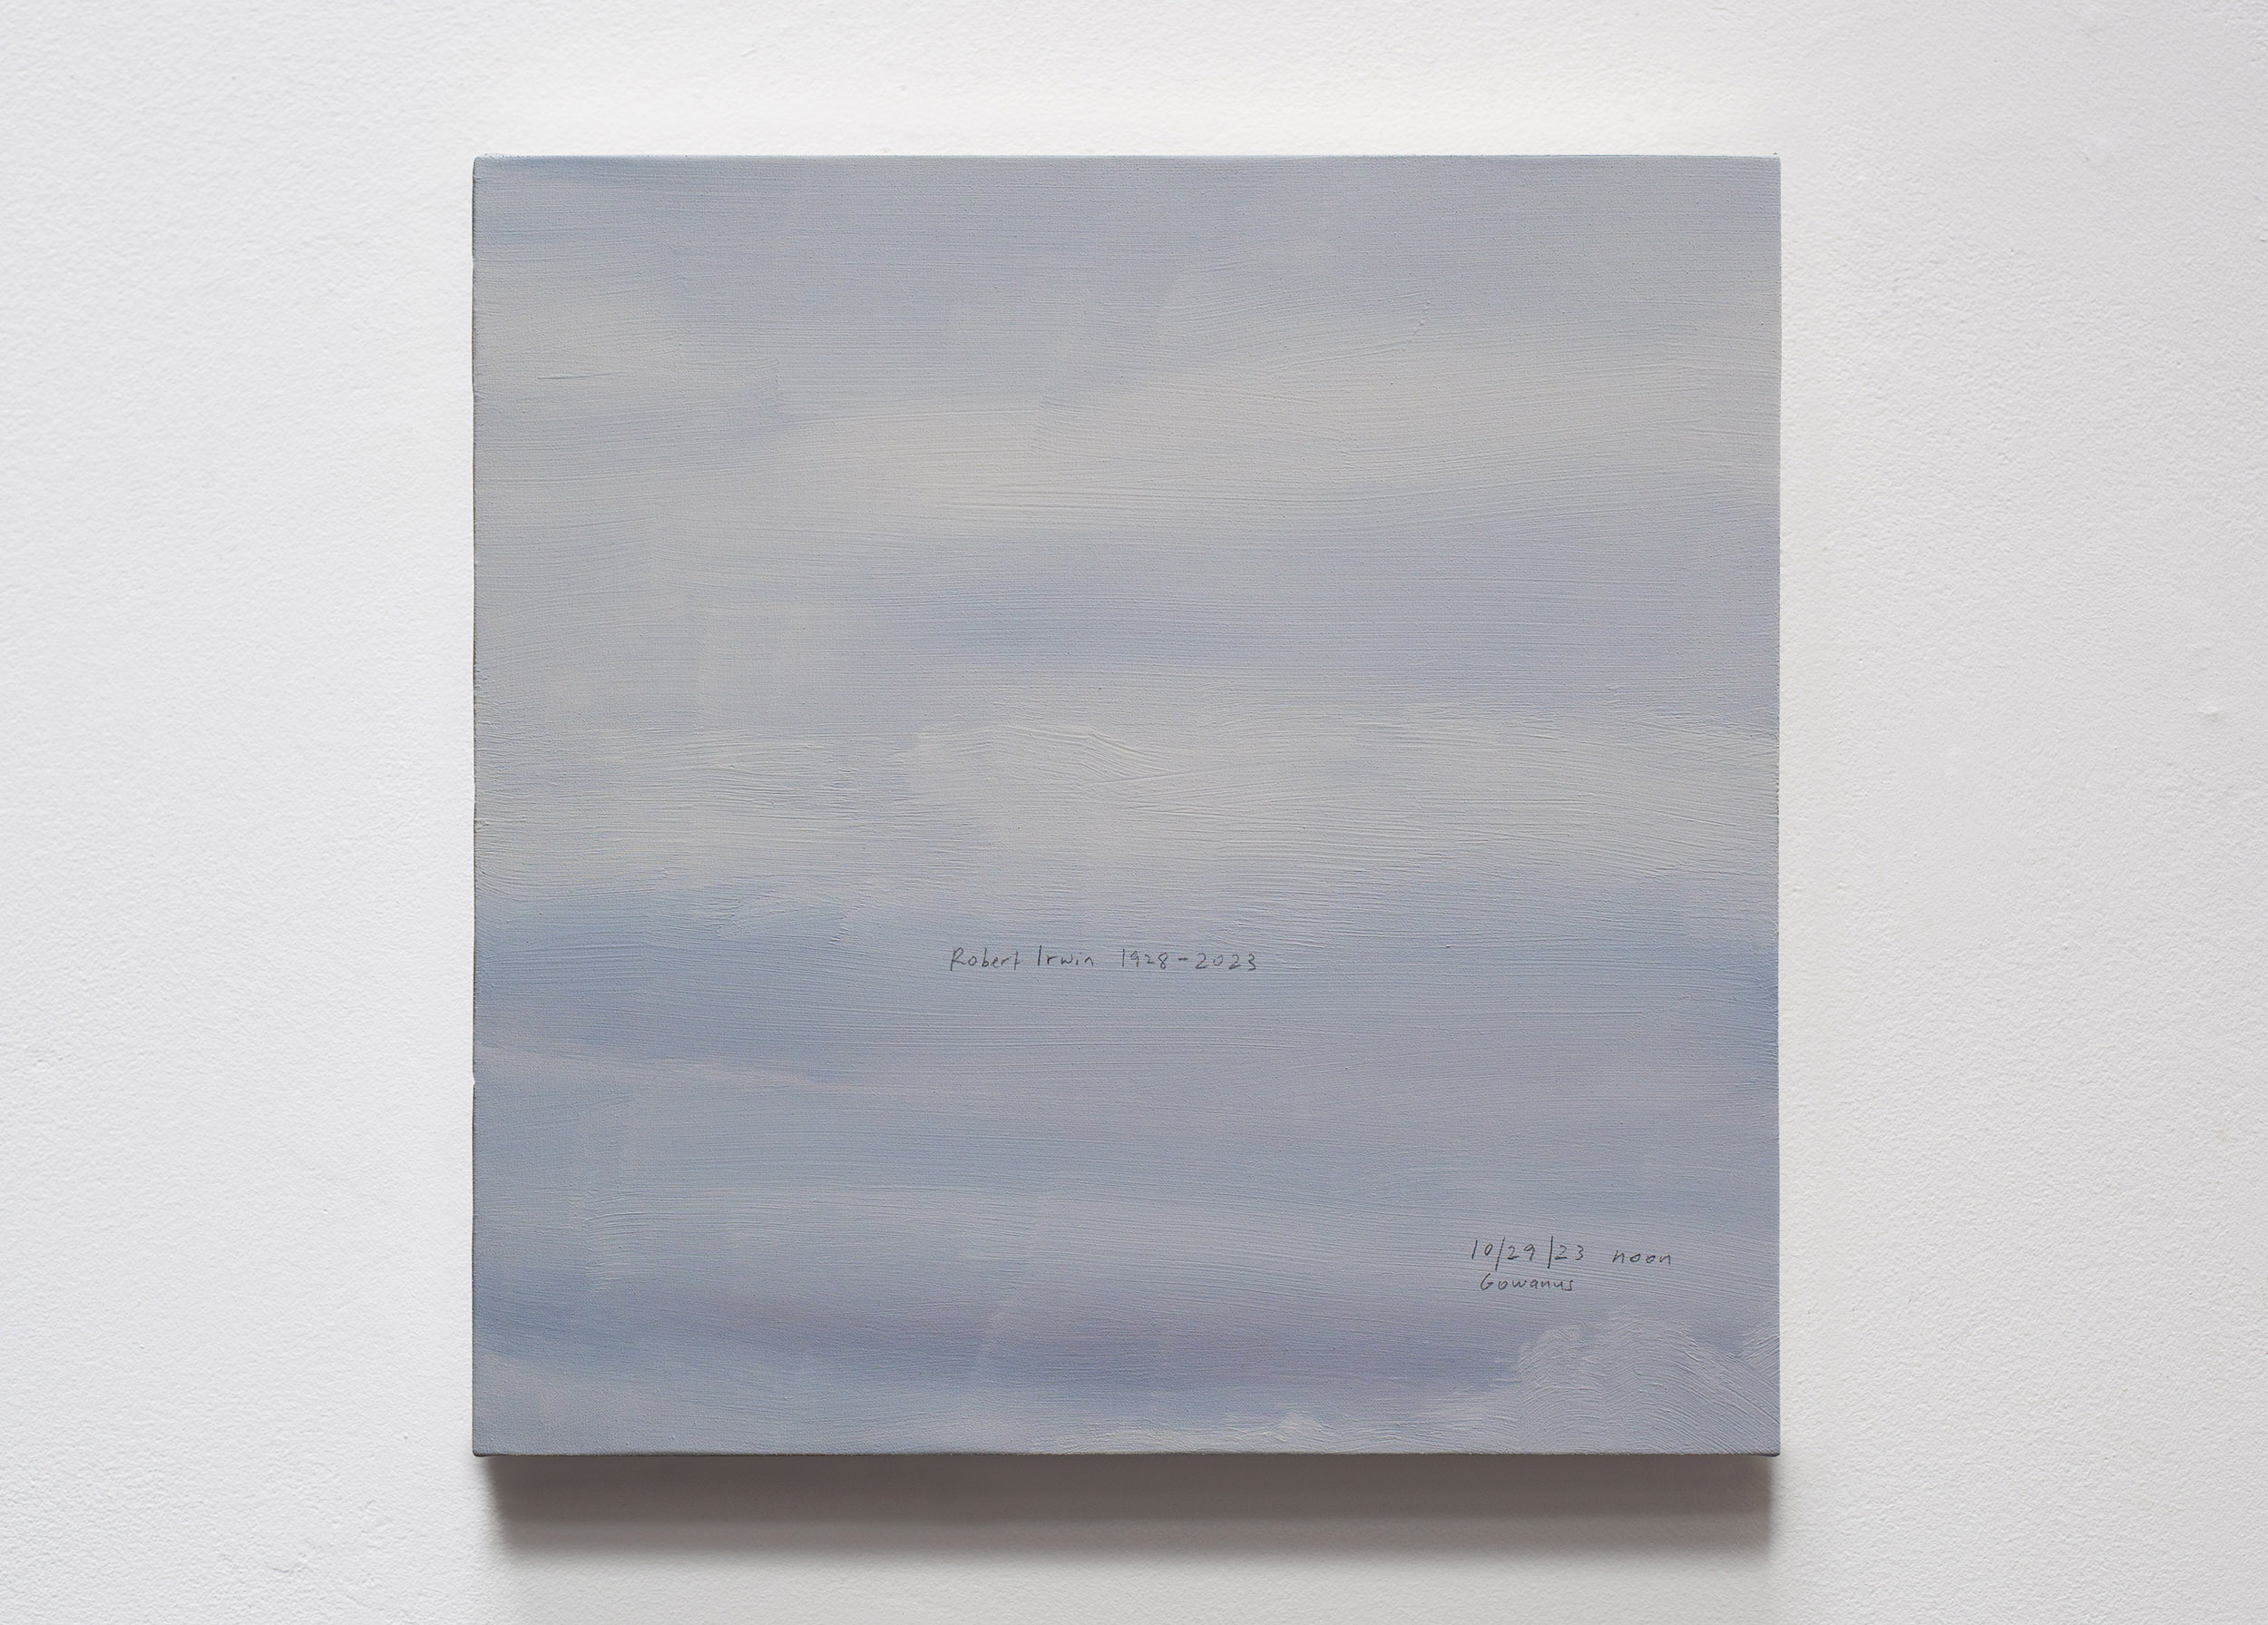 A 14 × 14 inch, acrylic painting of the sky. A journal entry is handwritten on the painting:

“Robert Irwin 1928–2023

10/29/23 noon
Gowanus”